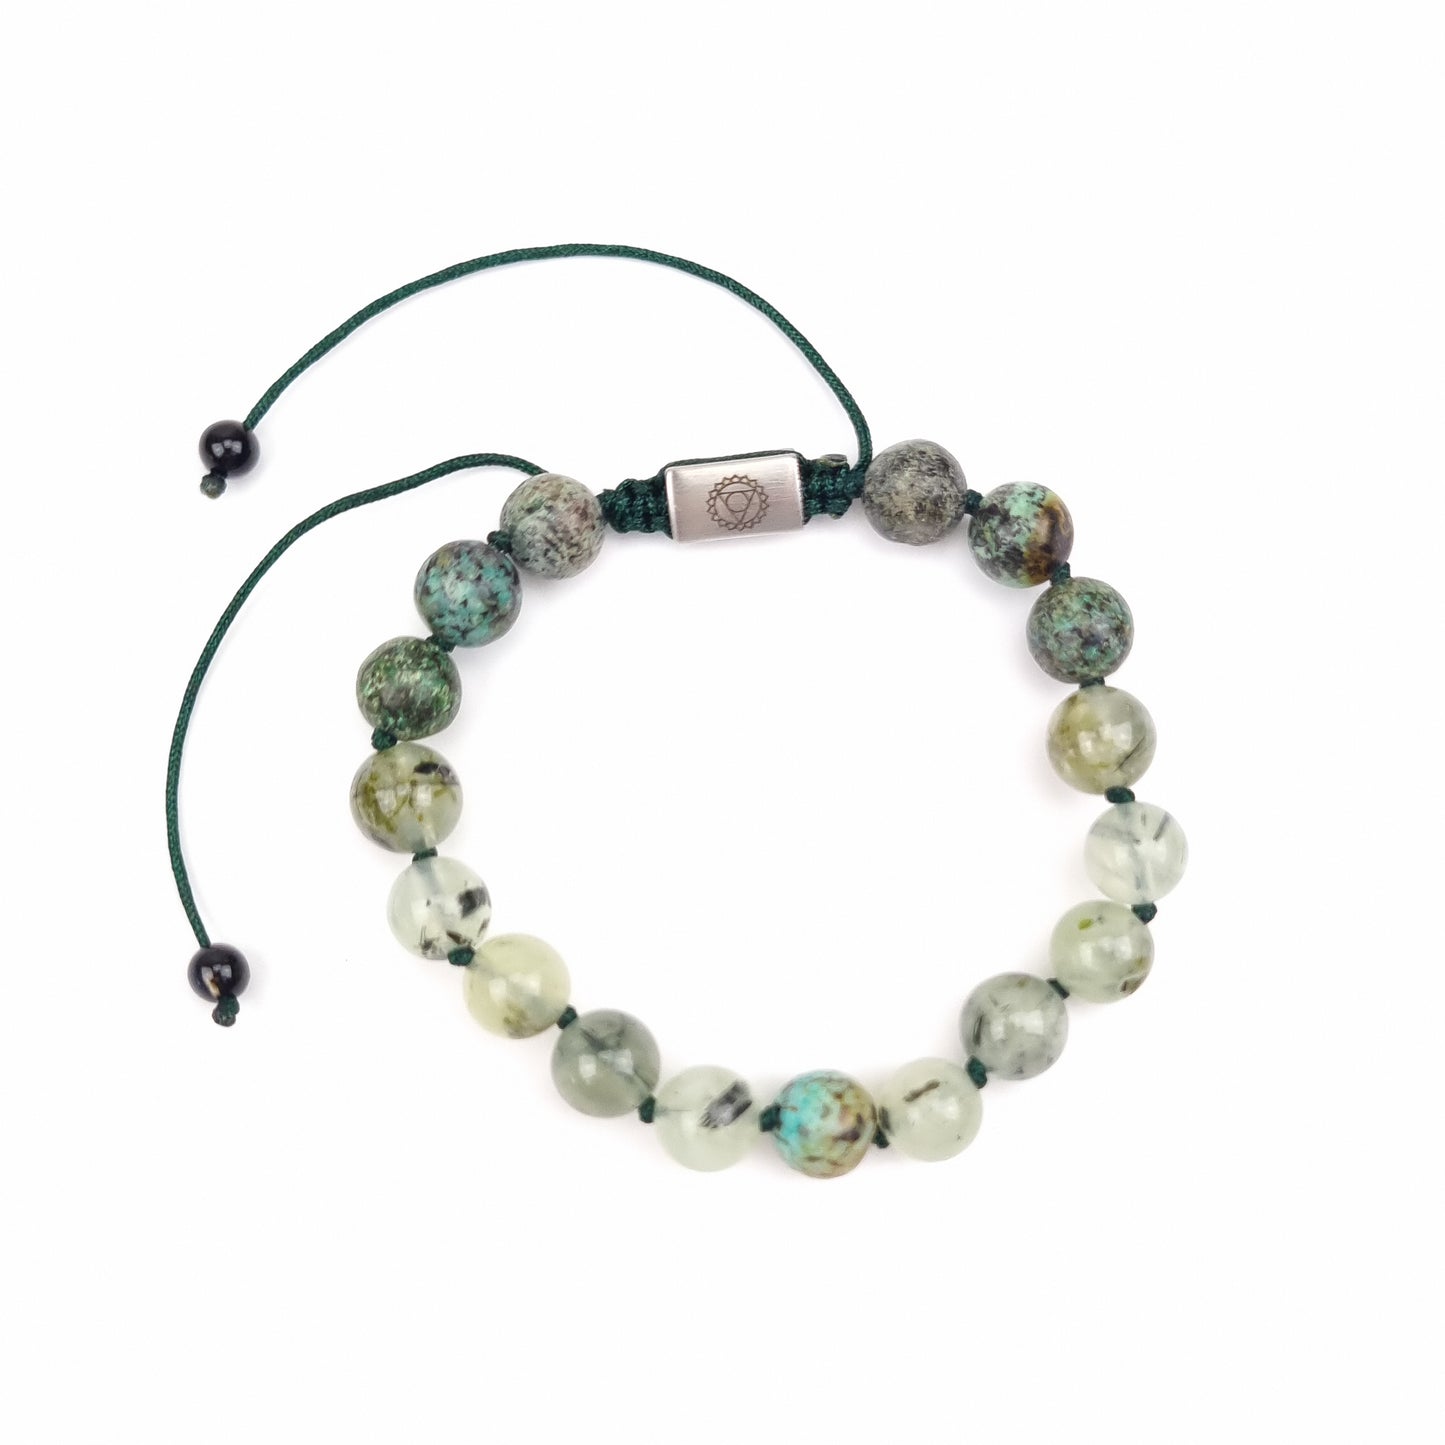 Mantra bracelet - 'I am open to what the universe offers me'